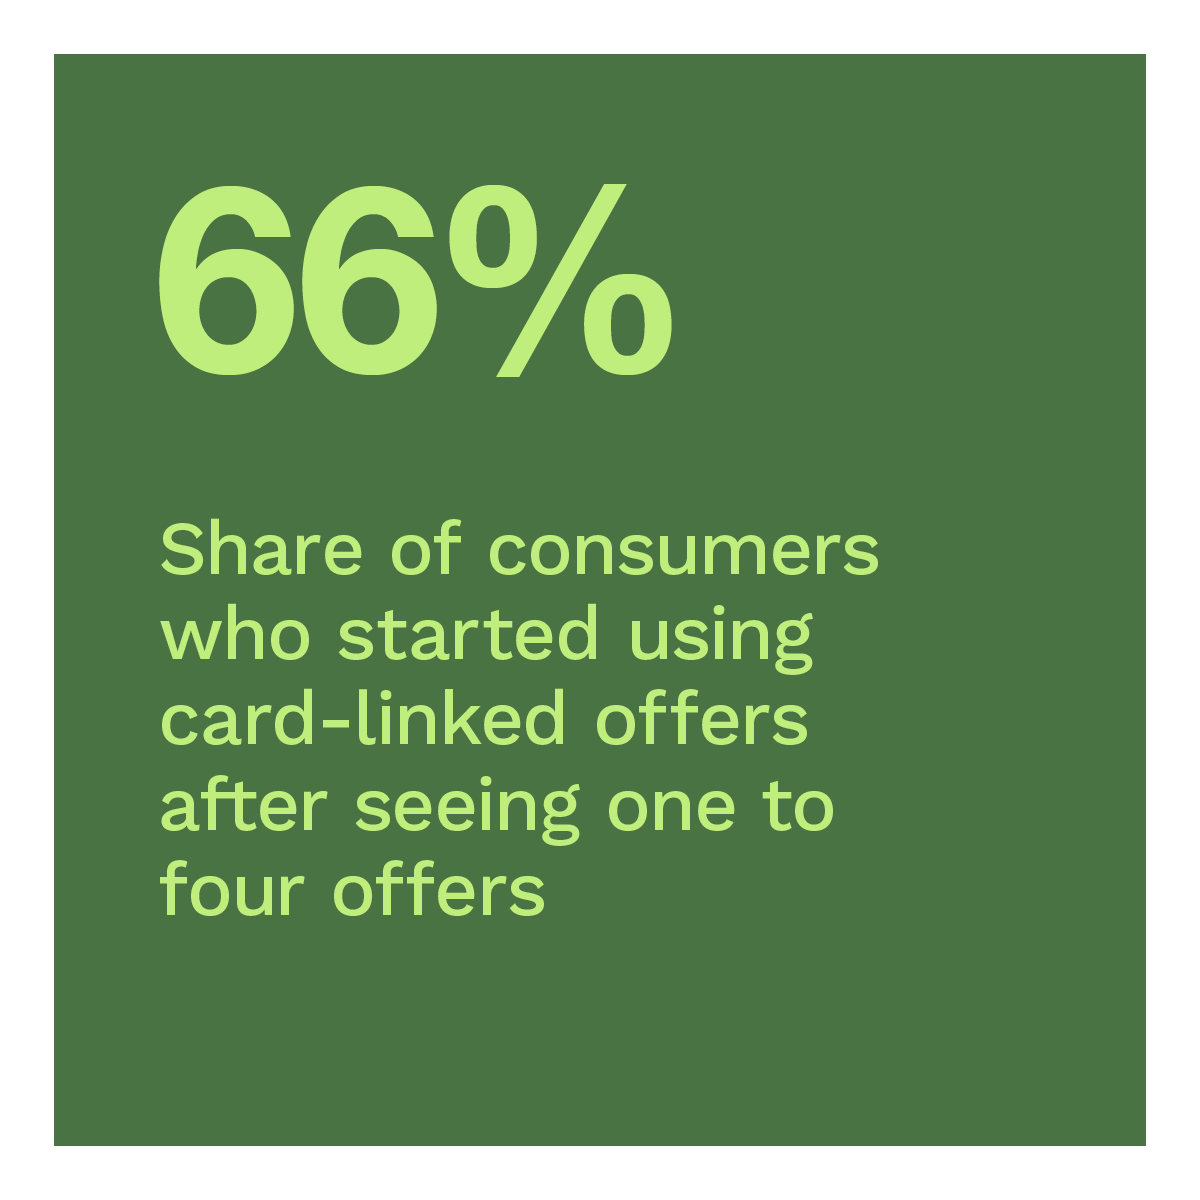  Share of consumers who started using card-linked offers after seeing one to four offers